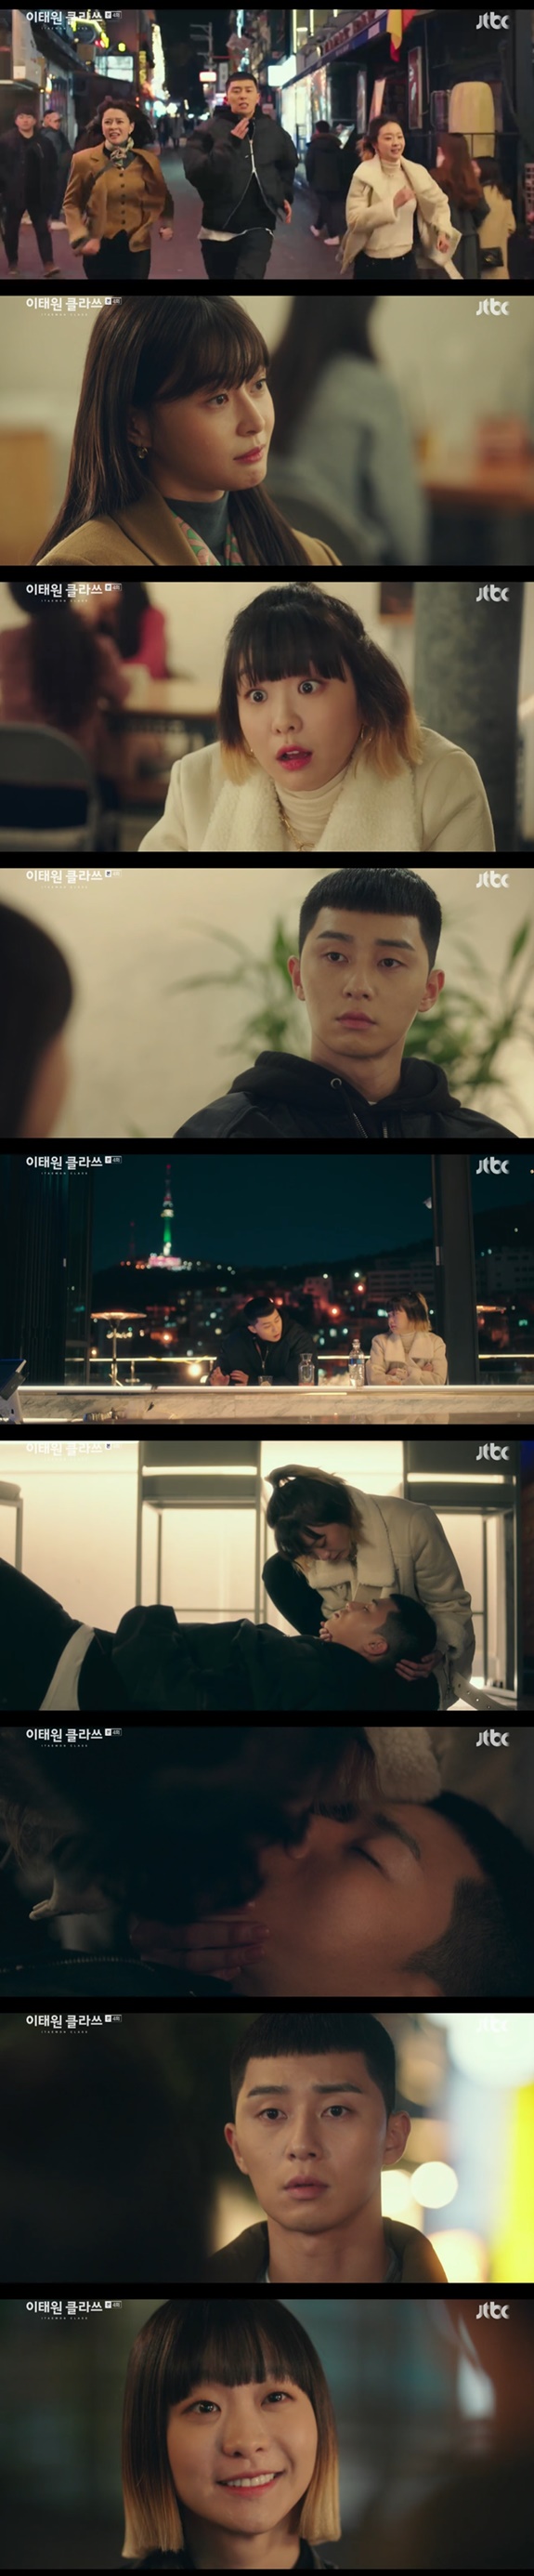 Itaewon Klath Kim Da-mi decided to become single night manager with a favorable feeling to Park Seo-joon.In the JTBC gilt drama Itaewon Klath (playplayplay by Gwangjin, directed by Kim Sung-yoon and Kang Min-gu), which was broadcast on the afternoon of the 8th, Park Seo-joon warned against the provocation of Jang The Fountainhead (played by Ahn Bo-hyun).After becoming an adult, Park and The Fountainhead were reunited in another bad performance at the police station.Jang Geun-soo (Kim Dong-hee), the half-brother of the Fountainhead, entered the high school student status and was reported to the Park Sae Roys Sanbam.The moon night was suspended for two months.The Fountainhead said he killed his father and provoked him to play because he said, Roy is a life-sucking roy because of me.But Roy said, Ive had it all the time. Ill hold it for another six years. My plan is 15 years. Your statute. stubborn.So you wait, he said.Joy (Kim Da-mi) found his attempted murder priors and articles that were intertwined with Jean The Fountainhead while searching for the name of the Roy on social media after feeling fond of the Roy.Joy was twenty years old two months later and was forced to date by a meeting partner.Joy met Roy where he accidentally ran away, and Roy punched the violent man in revenge instead of Joy.Park fled with SuA (Kwon Na-ra) and Joy, who were waiting for him, and a three-way face-to-face was held.Joy said to Roy, who is about to break up, I do not want to live in debt, but how about a cup of coffee? The store promotion is a specialty field.In the absence of Roy, SuA asked, Do you like Roy? And Joy asked, I have an interest.So, SuA said, Youre not the kind of kid you can handle. Im sorry youre the reason youre the new Roy.Joy responded, How do you know Ive been suspended for me? Did your sister report it? Without being able to do so, SuA confessed, I am the one who reported you, and asked, Do you like me? Still, Park said, Im sorry but I still like it.SuA felt more sorry for Park Sae-ro than feeling superior to Joy.After SuA left, Park and Joy talked about their drunkenness.Joy asked, Did you feel betrayed by a friend you liked for more than 10 years? But Park said, It is your job, your life is faithful. It is not a business, and your heart is not a gift and take.Then Roy expressed his sadness from the Janga. I cant sleep well at night. I miss it, I feel lonely, I get angry.I wanted my life to be a little more bitter, Joy said, and once again felt a sense of genuineness in the face of Roy.Joy, thinking: I want to sweeten this mans life, secretly kissed the drunken, fallen-down Park Roy.After that, Joy went to the night and said, I will make my dream come true.